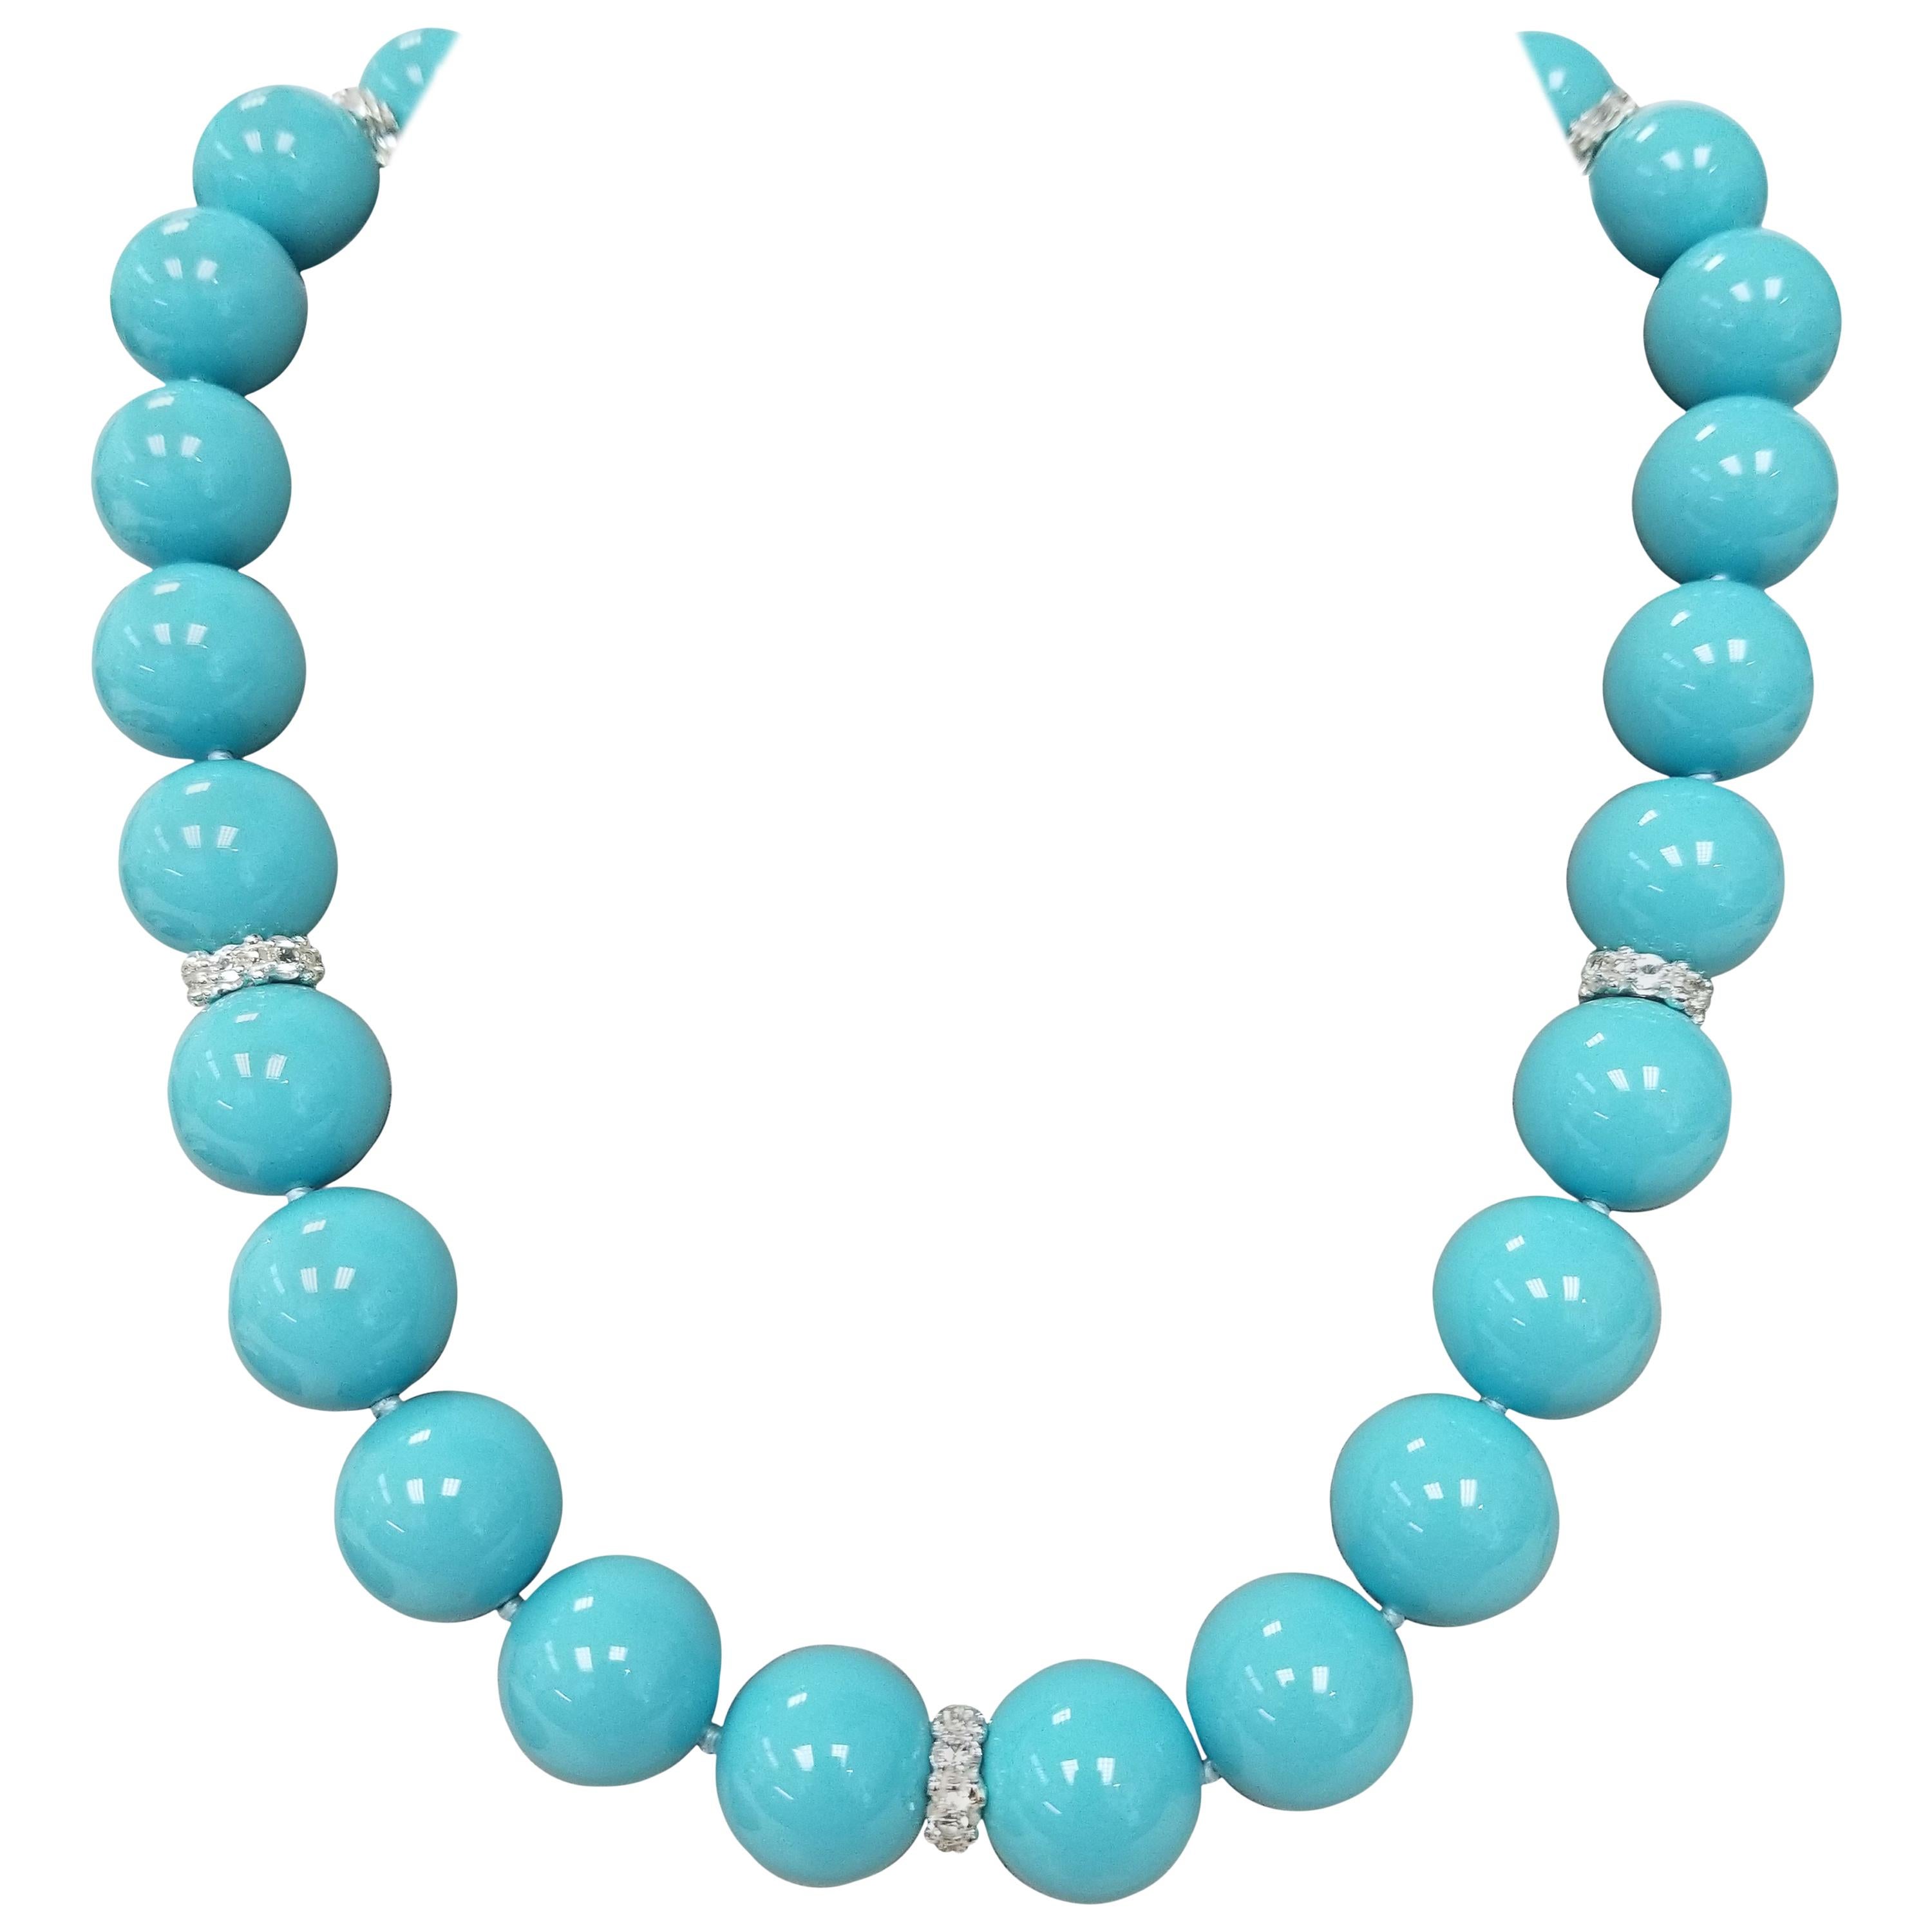 Spherical Beads of Composite Turquoise and Sapphire Rondelle Necklace